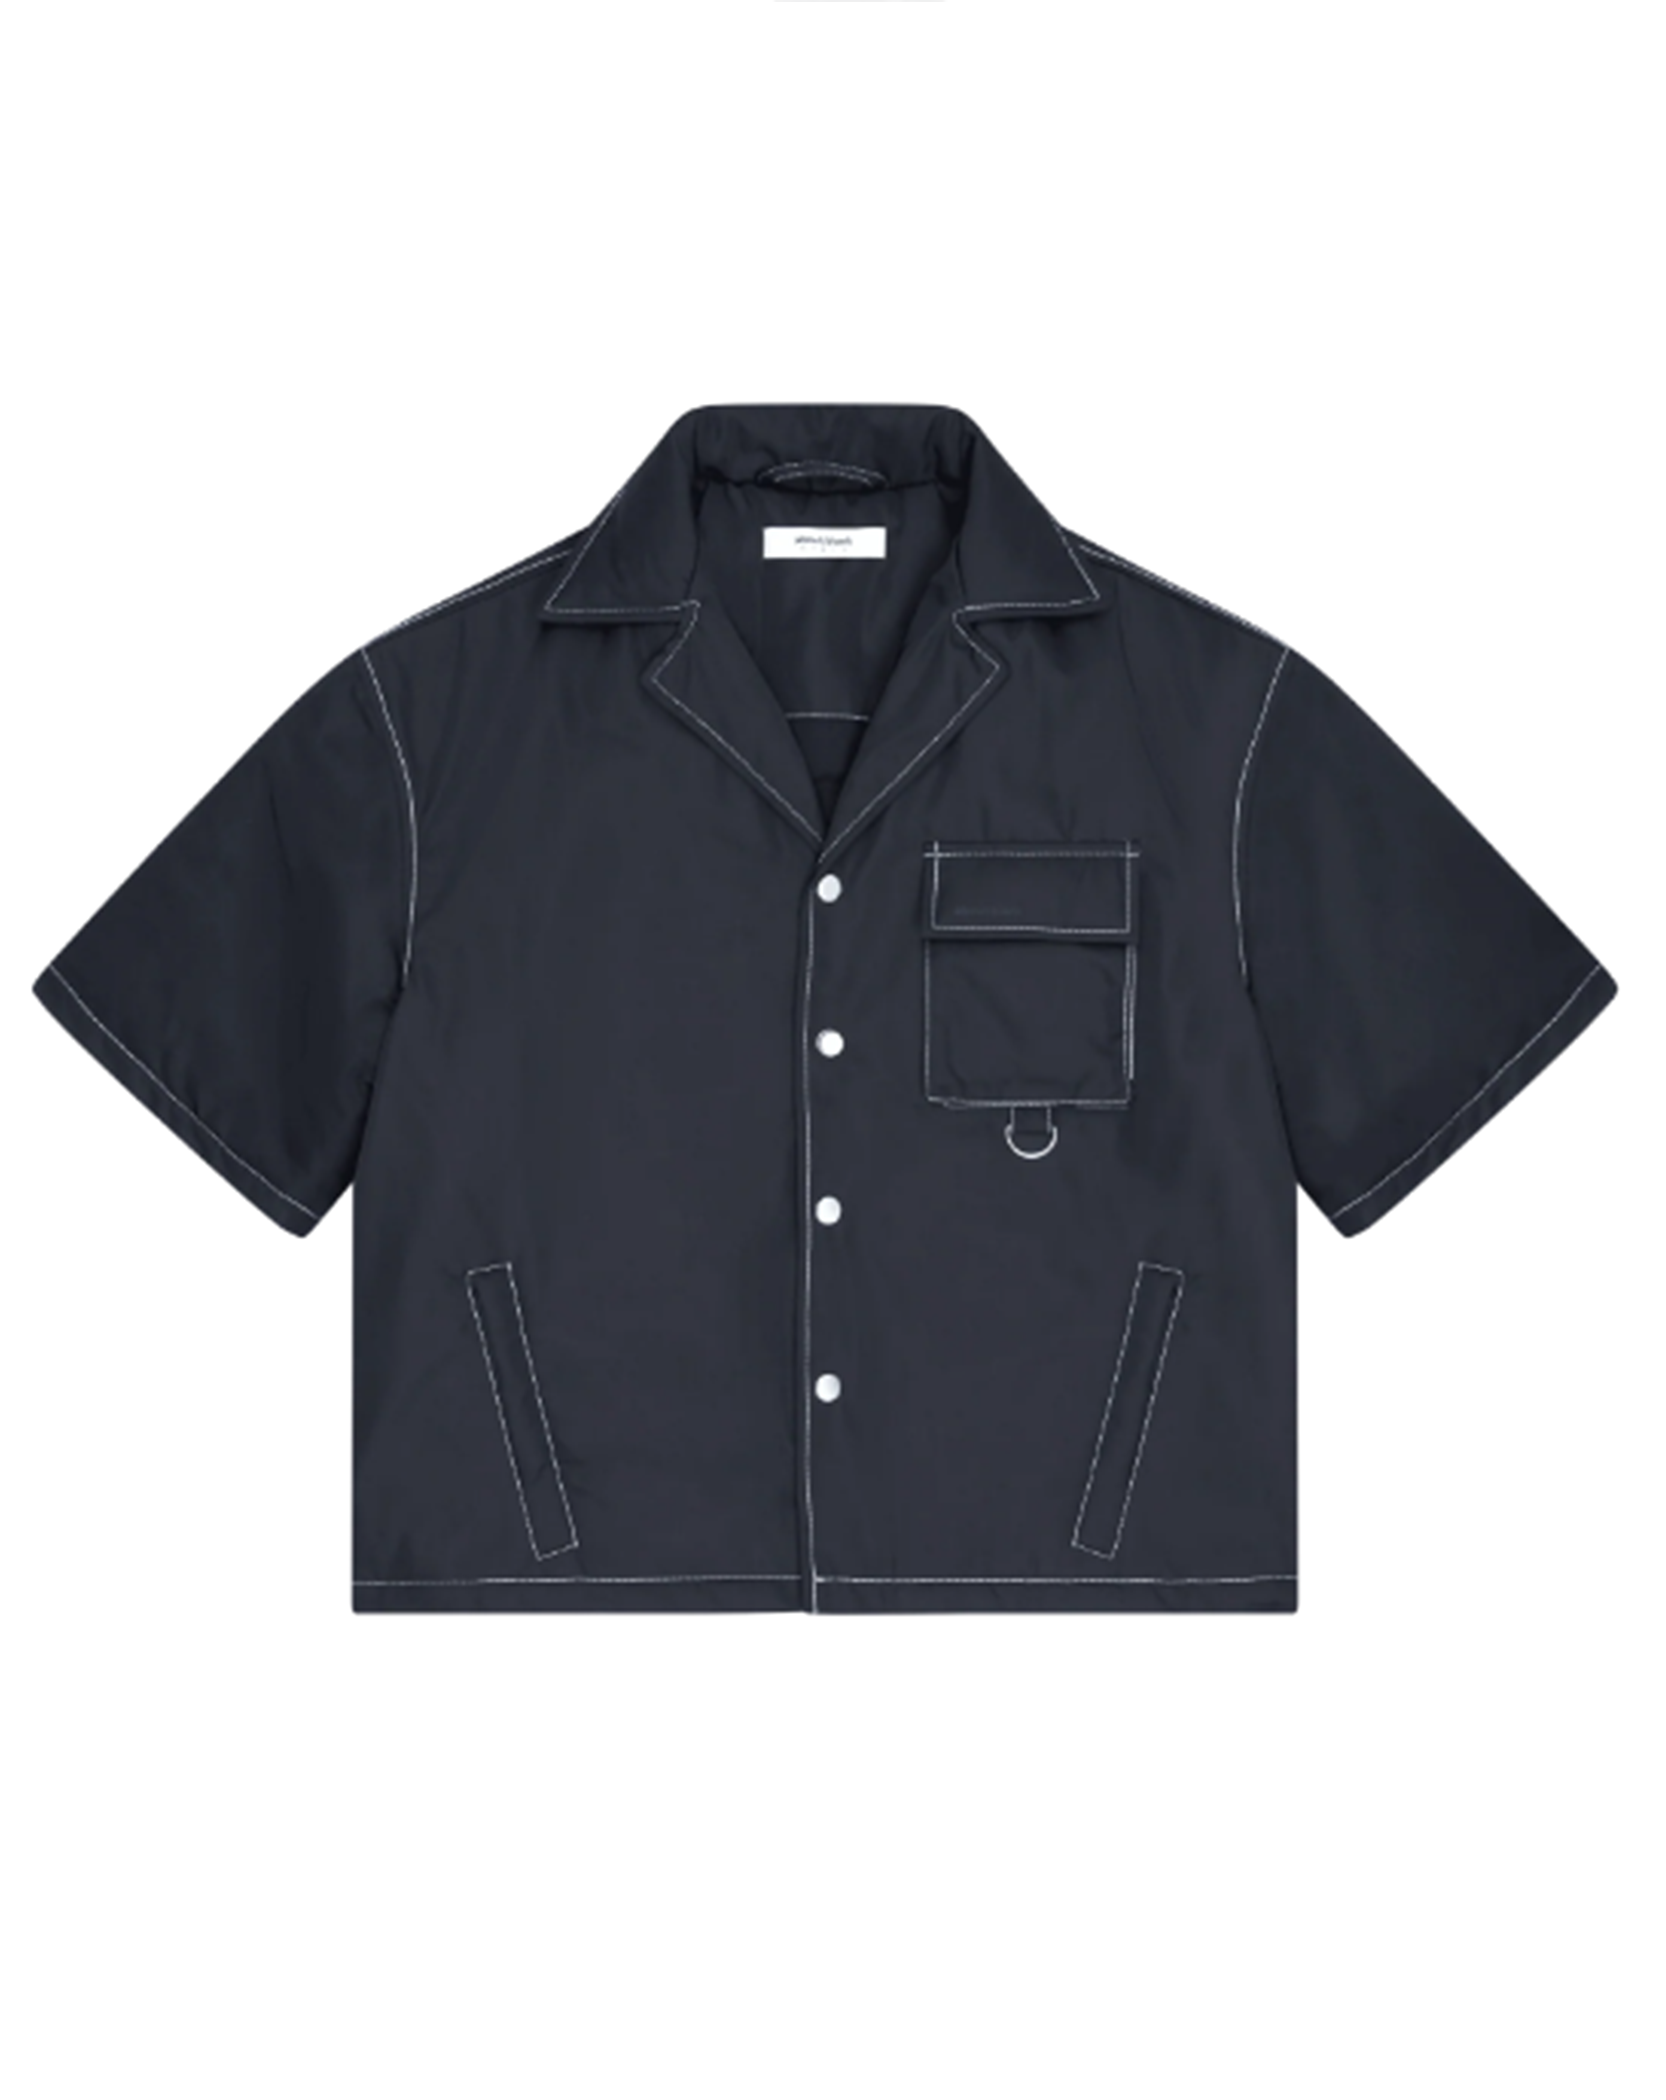 About blank - padded utility shirt